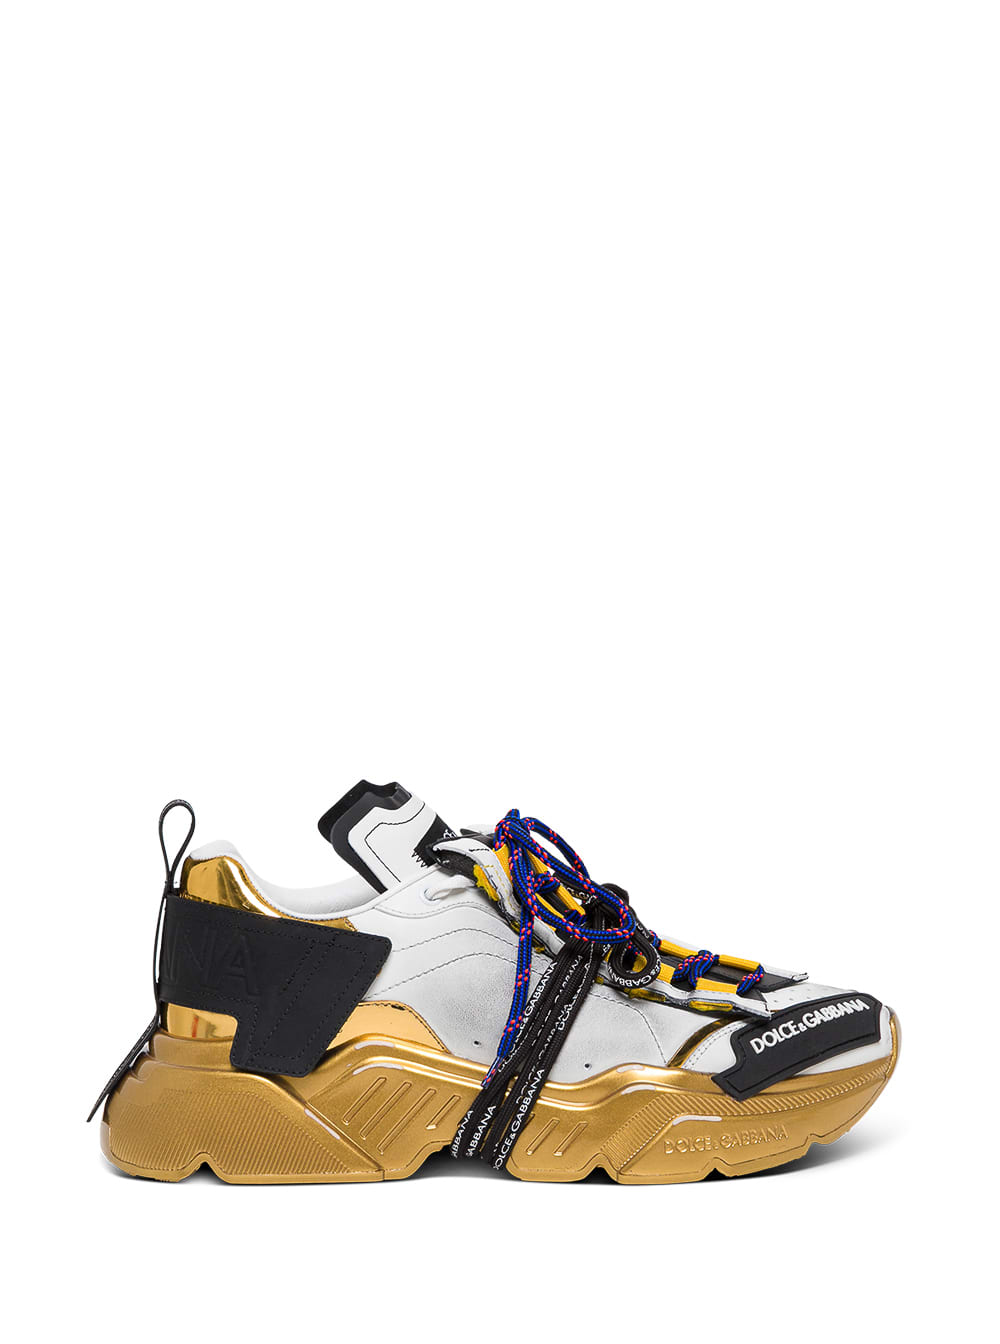 Dolce & Gabbana Daymaster Leather Sneakers With Laminated Bottom